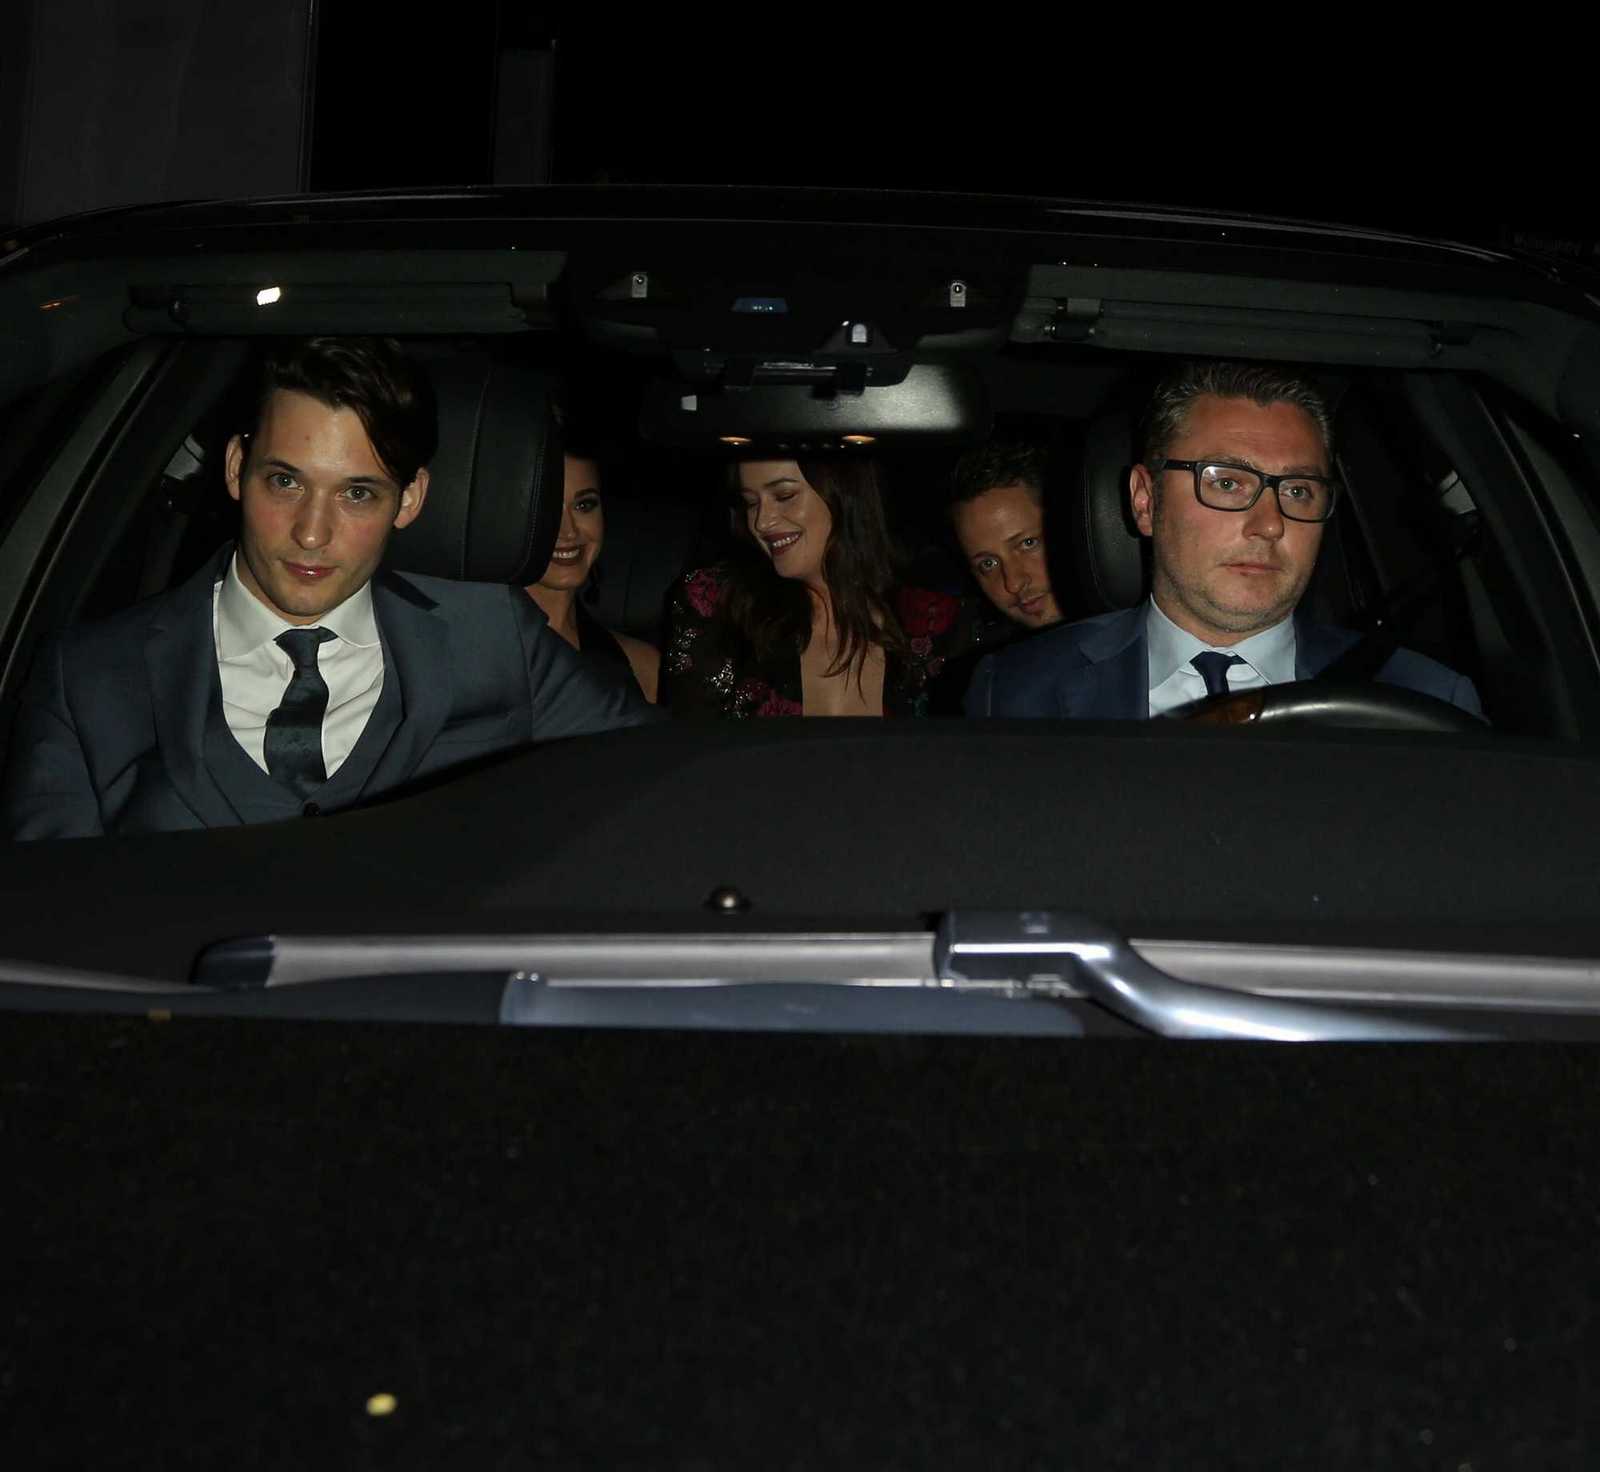 Leaving_Elton_John_s_Birthday_Party_with_Katy_Perry_-_March_25-05.jpg